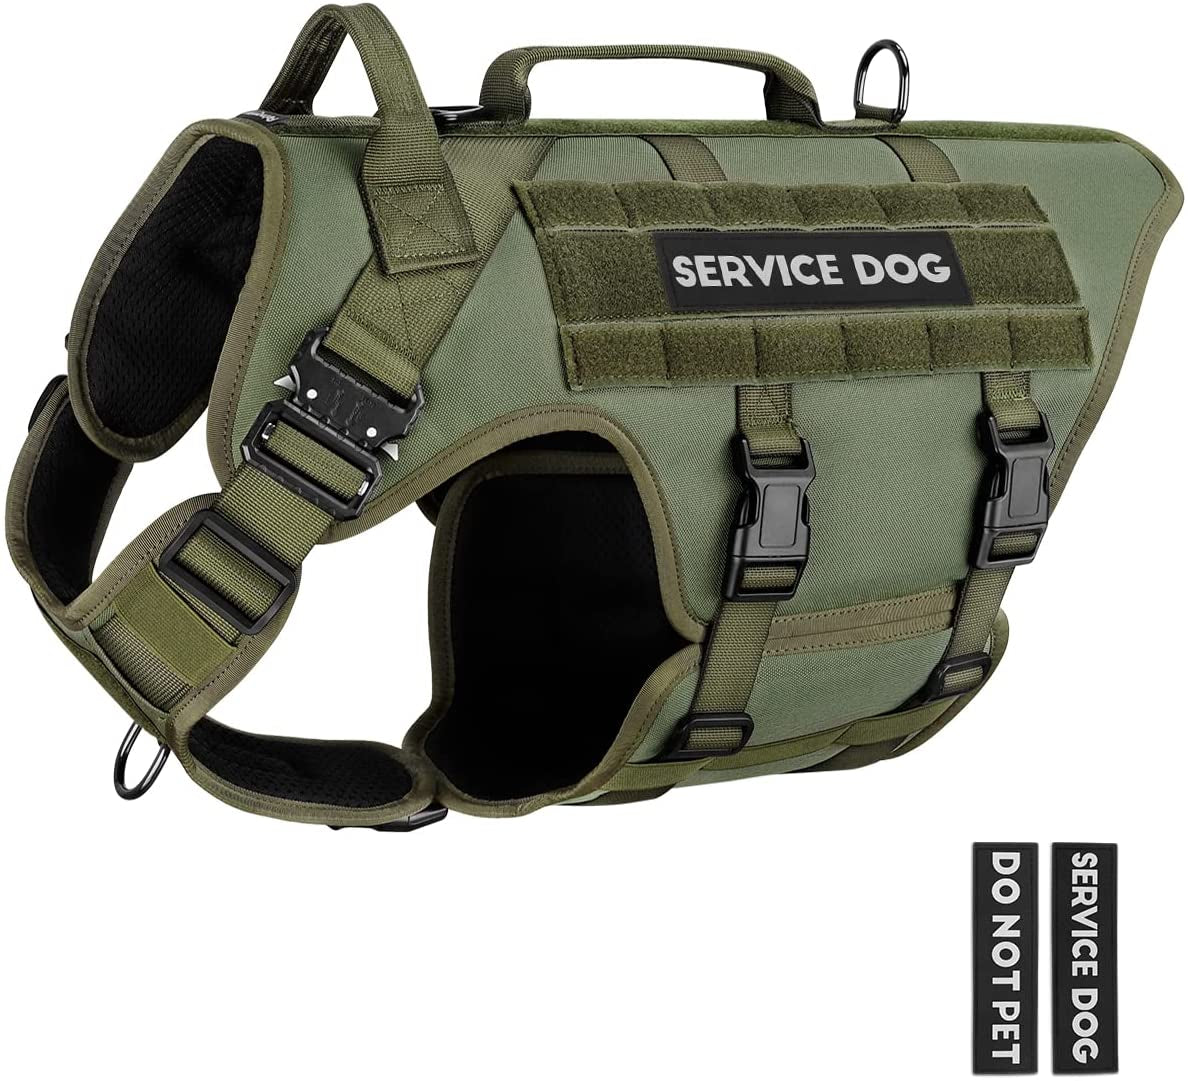 Tactical Dog Harness - PETNANNY Service Dog Vest for Large Dogs Fully Body Coverage in Training Dog Harness with 2 Reflective Dog Patches, Handle, Hook and Loop Panels, Walking Hunting Dog MOLLE Vest Animals & Pet Supplies > Pet Supplies > Dog Supplies > Dog Apparel PETNANNY Green XL 